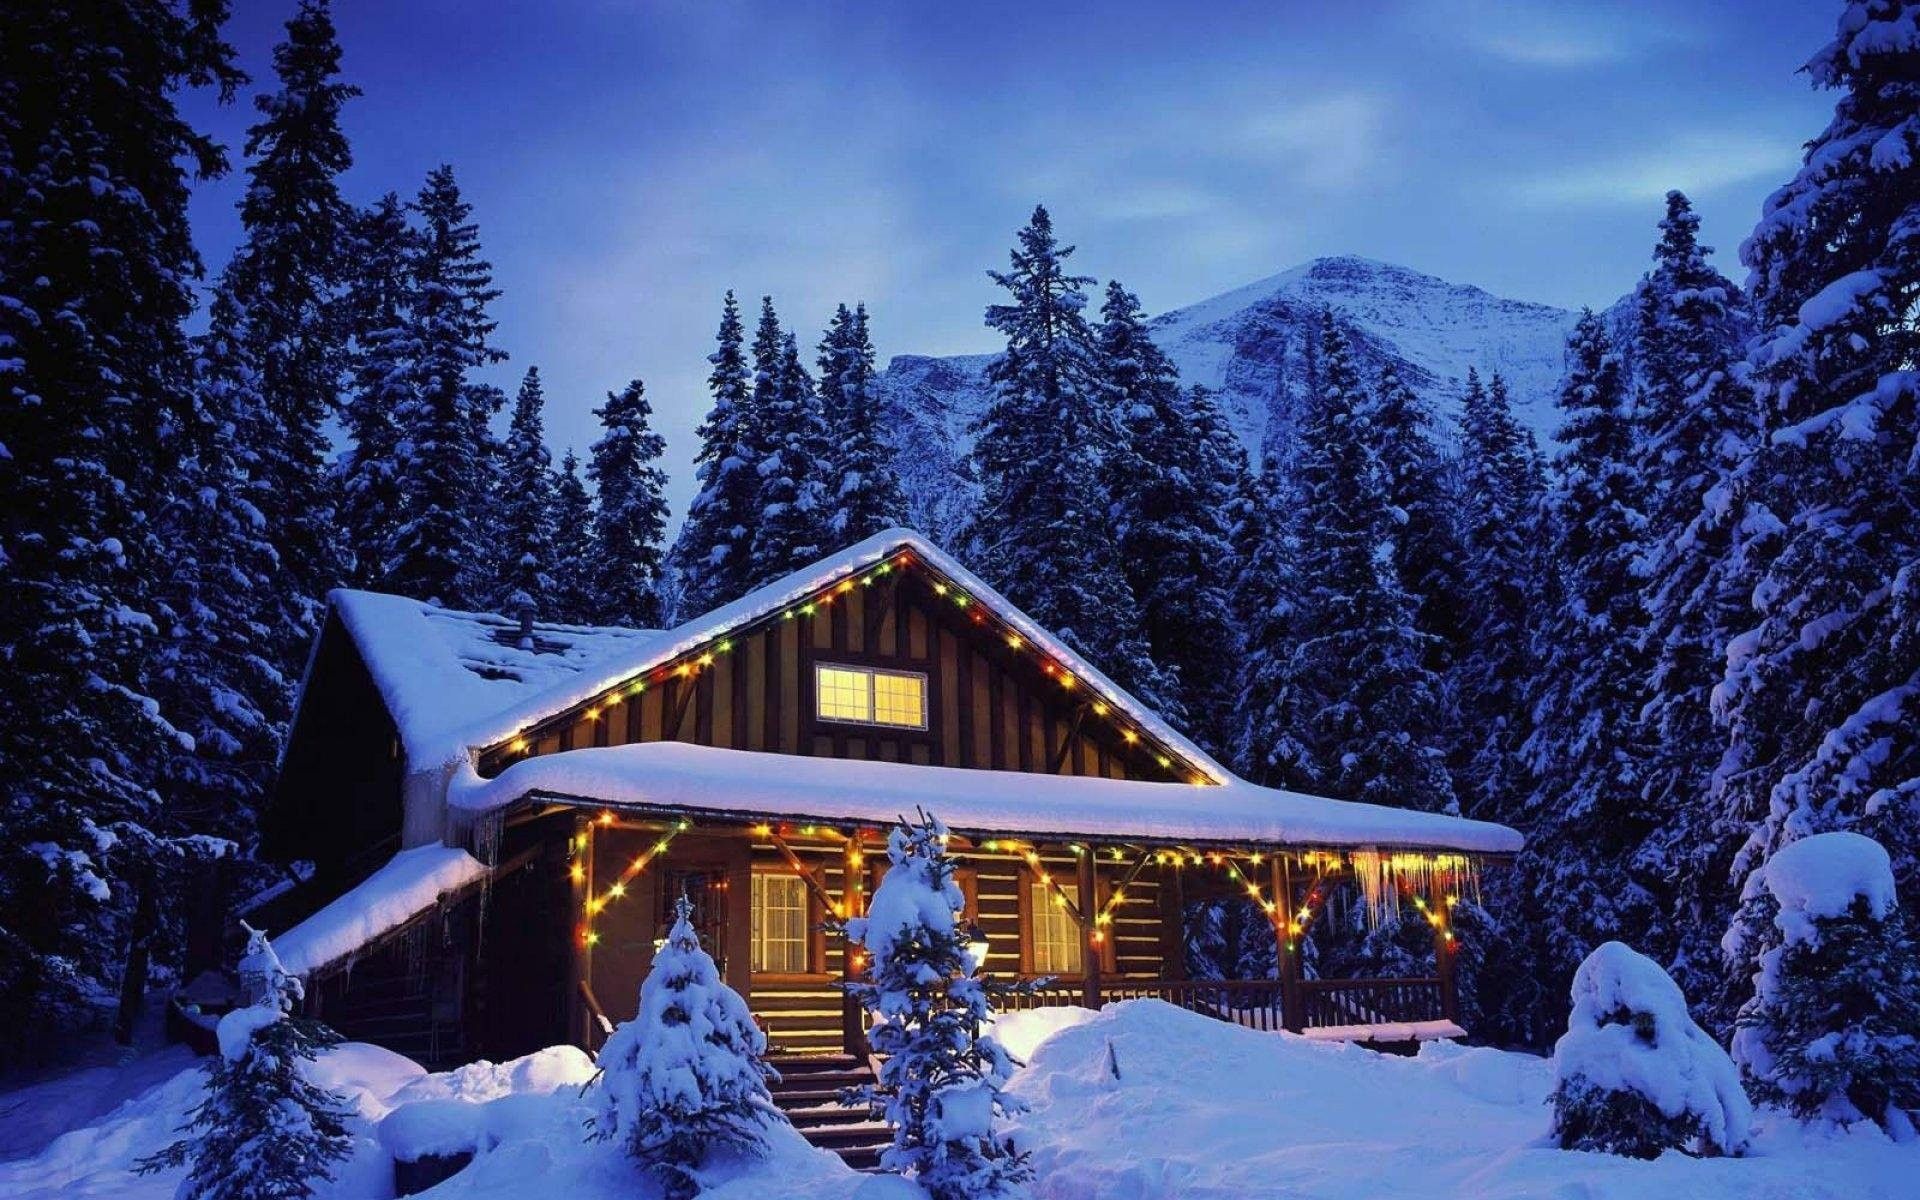 Christmas Cabin Wallpaper Free Christmas Cabin Background